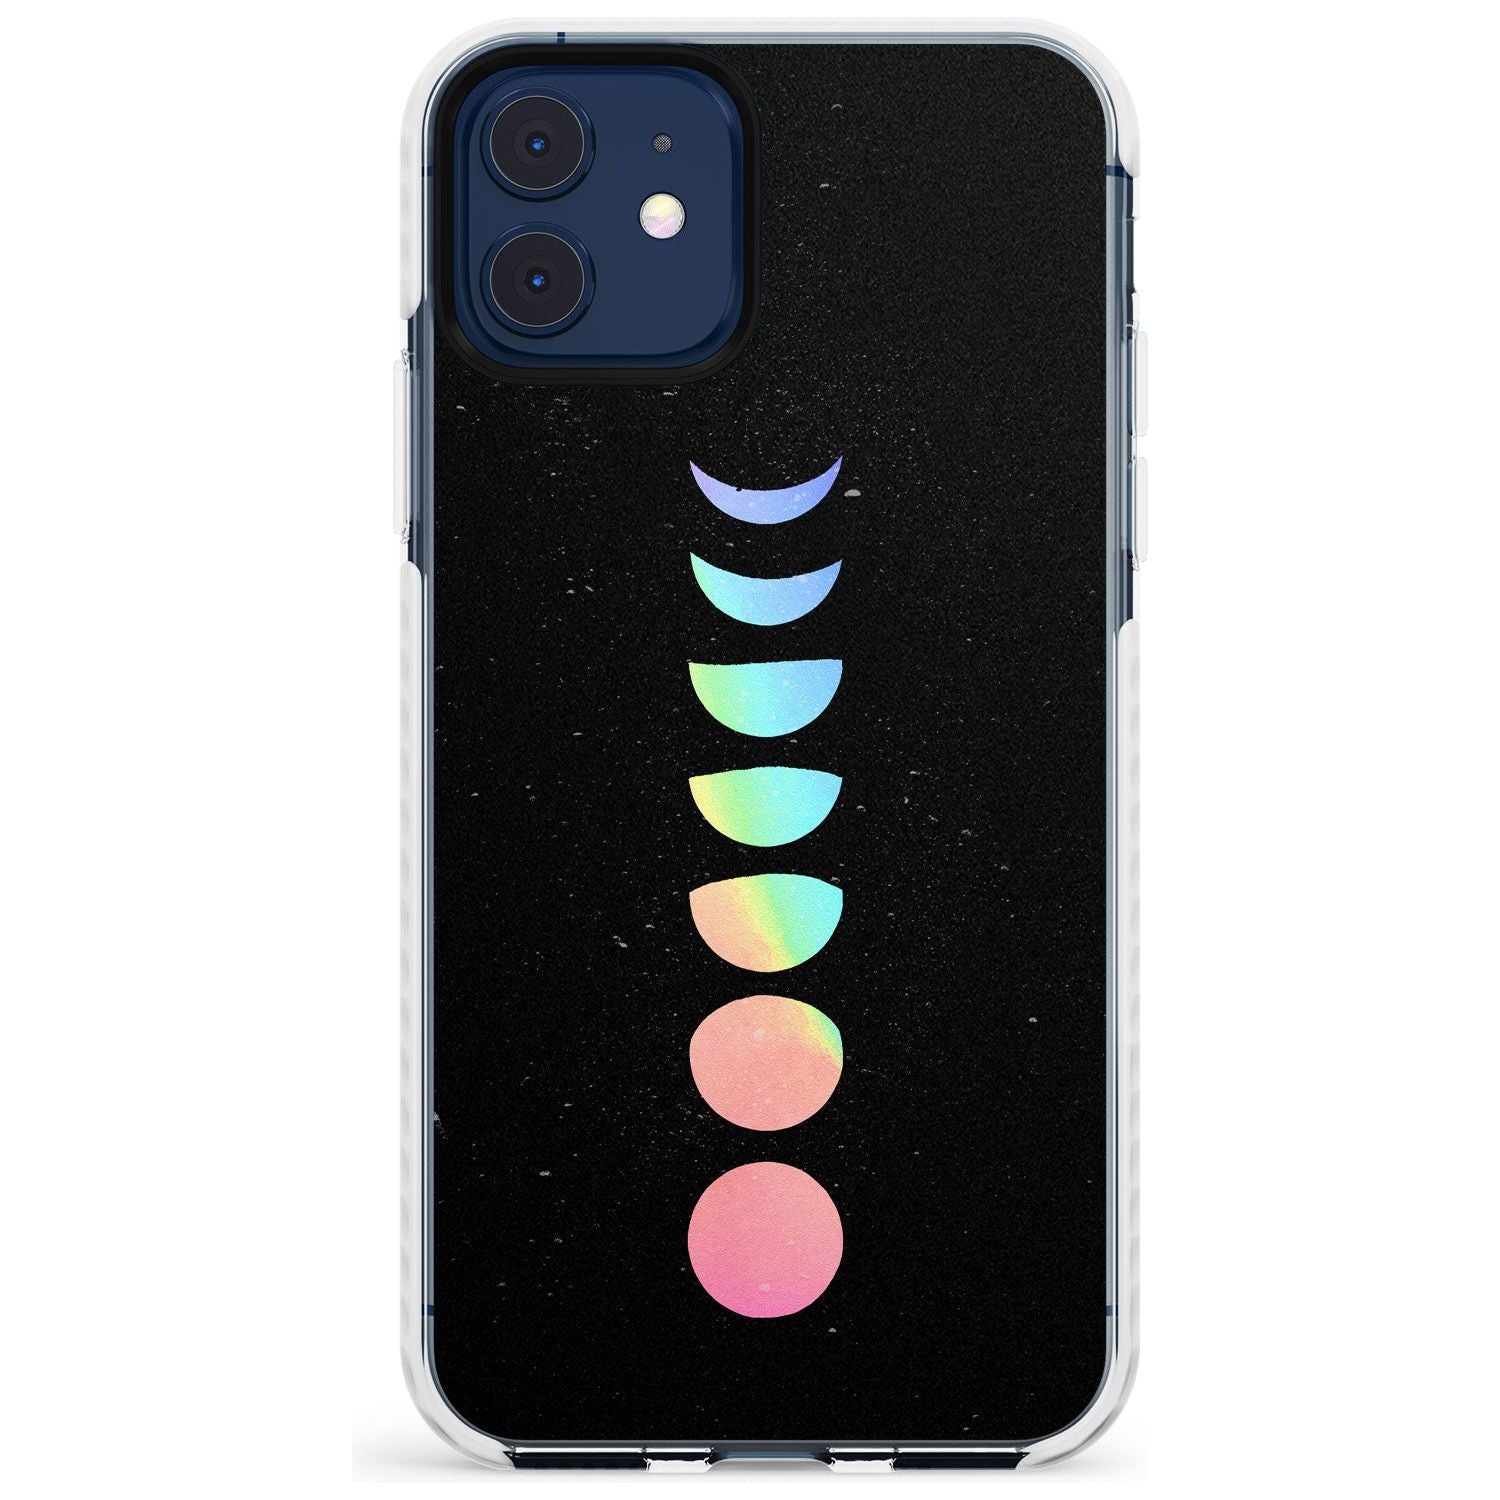 Pastel Moon Phases Slim TPU Phone Case for iPhone 11